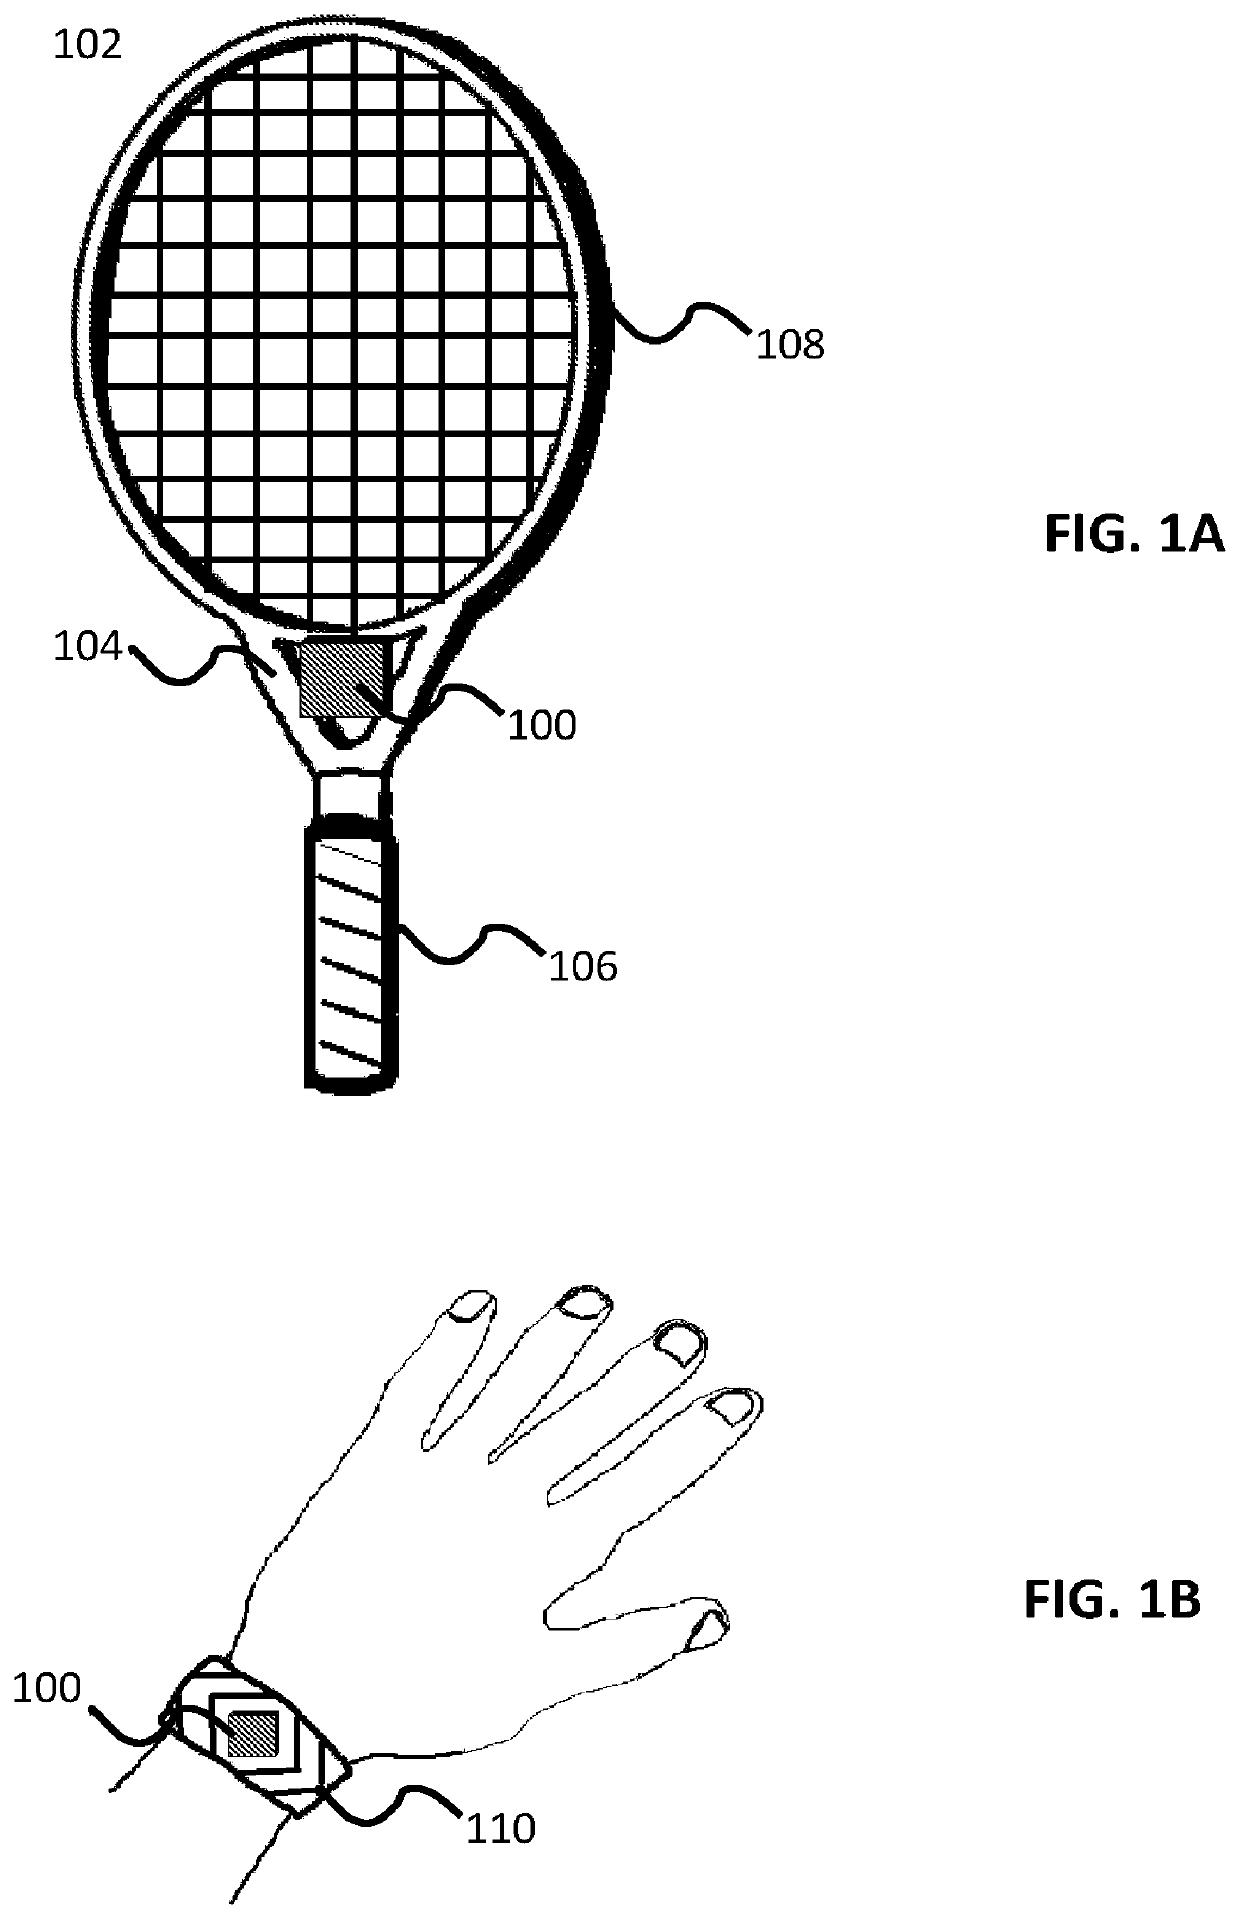 Tennis racket sensor system and coaching device with ball machine integration